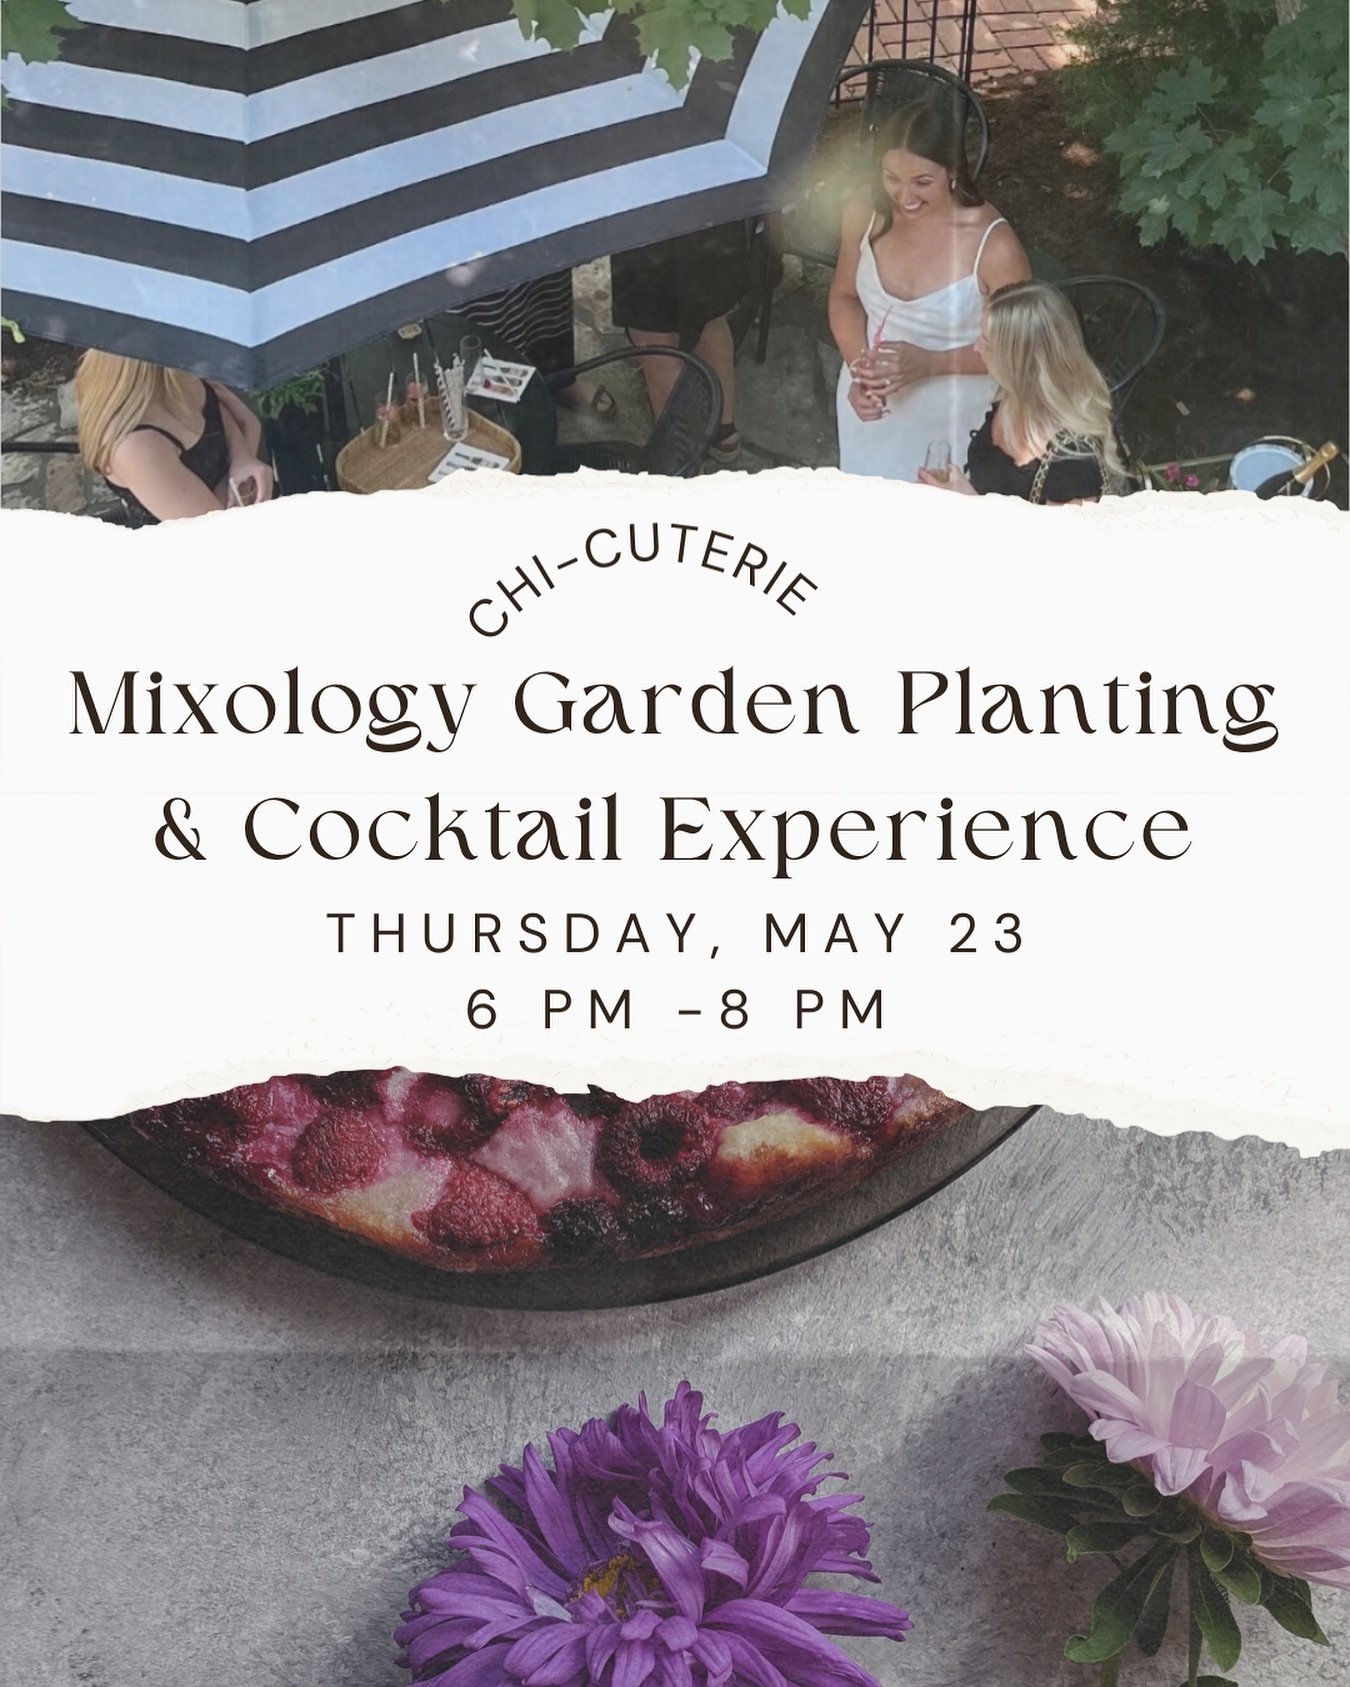 Love fun experiences? ⭐️
Looking for the perfect gift for mom, sister, or friend! This event is for YOU! 

We invite you to #experiencechicuterie for a fun night of planting your own edible cocktail garden and mixing cocktails - all in our beautiful 